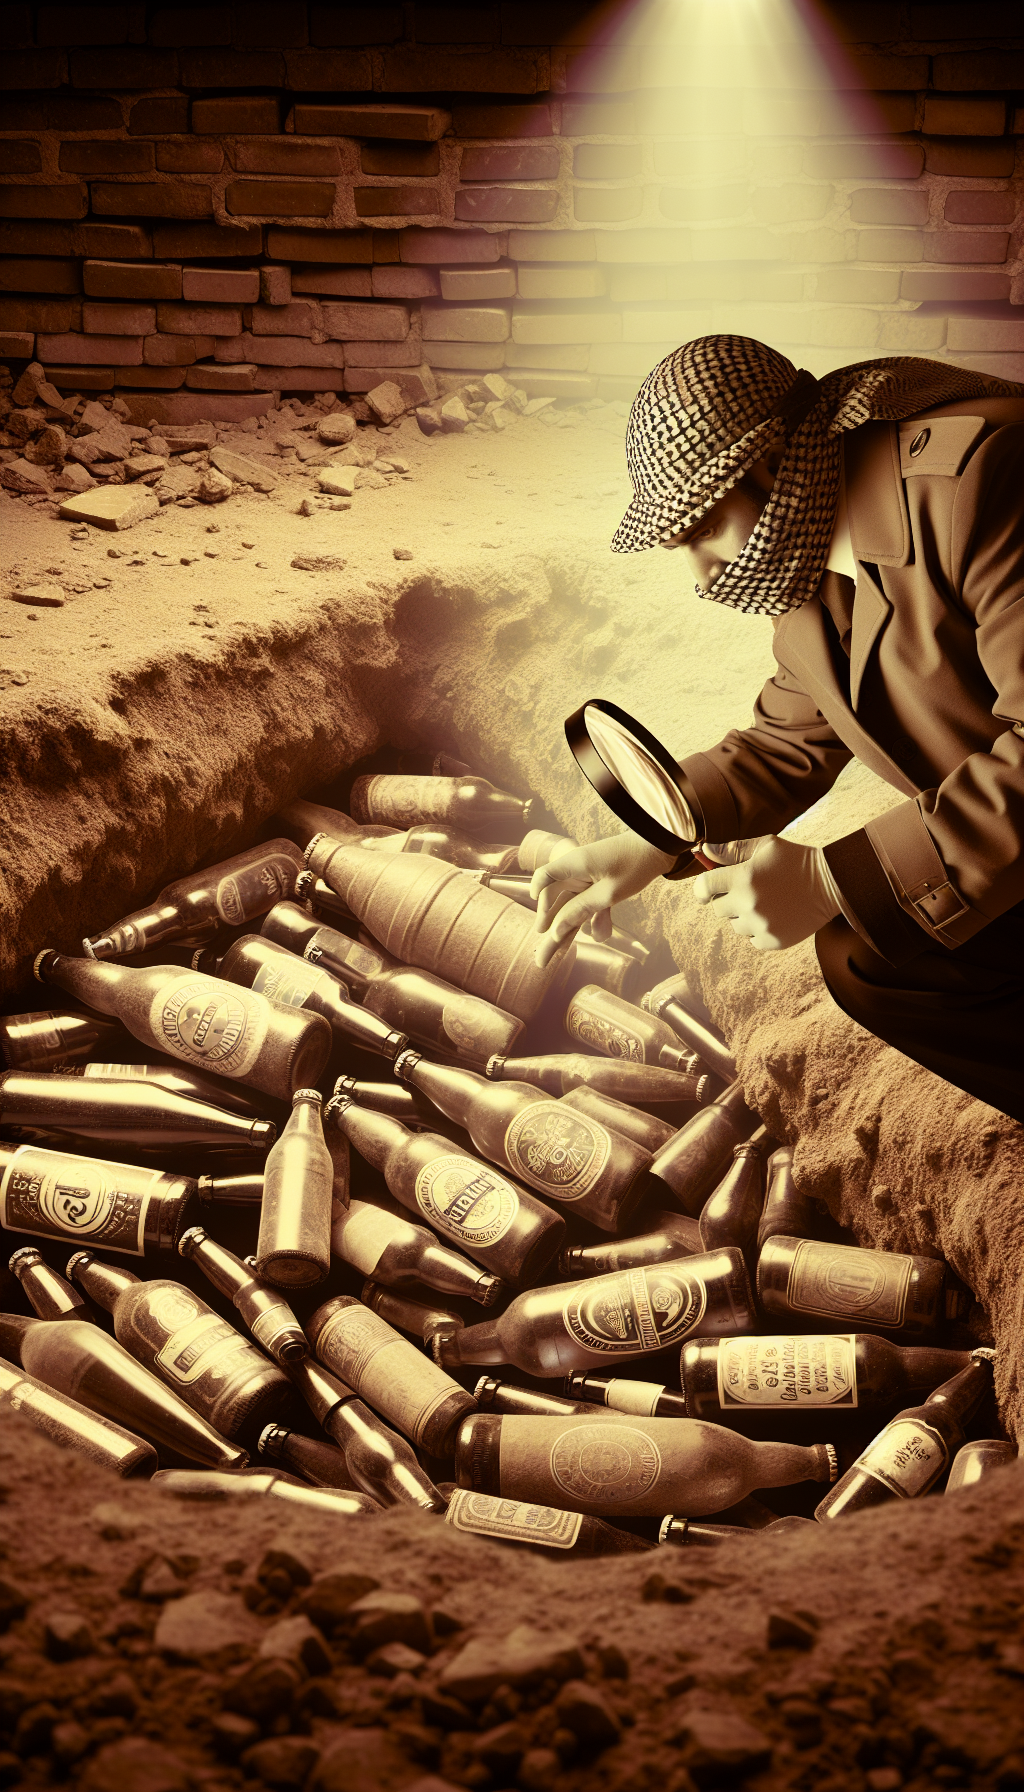 A sepia-toned image depicts a detective-themed archaeologist, magnifying glass in hand, kneeling in a treasure trove of antique beer bottles buried beneath layers of earth. The magnifying glass reveals a ghostly overlay of brewery origin and dates over each bottle, showcasing the intricate details and history tied to each vessel, emphasizing the detective work in old beer bottle identification.